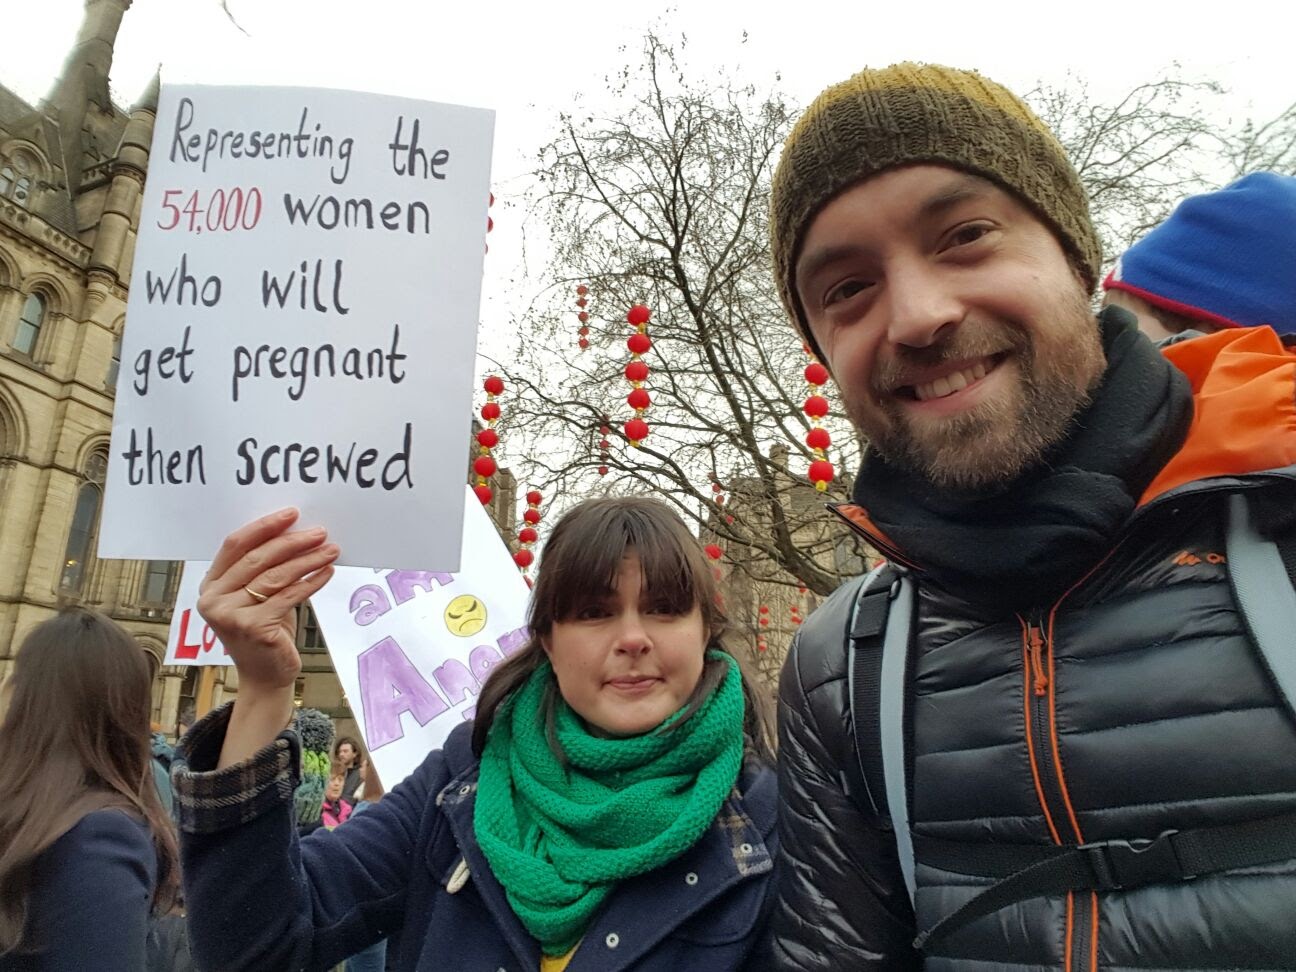 Woman holding a sign that says 'Representing the 54,000 women who will get pregnant then screwed'